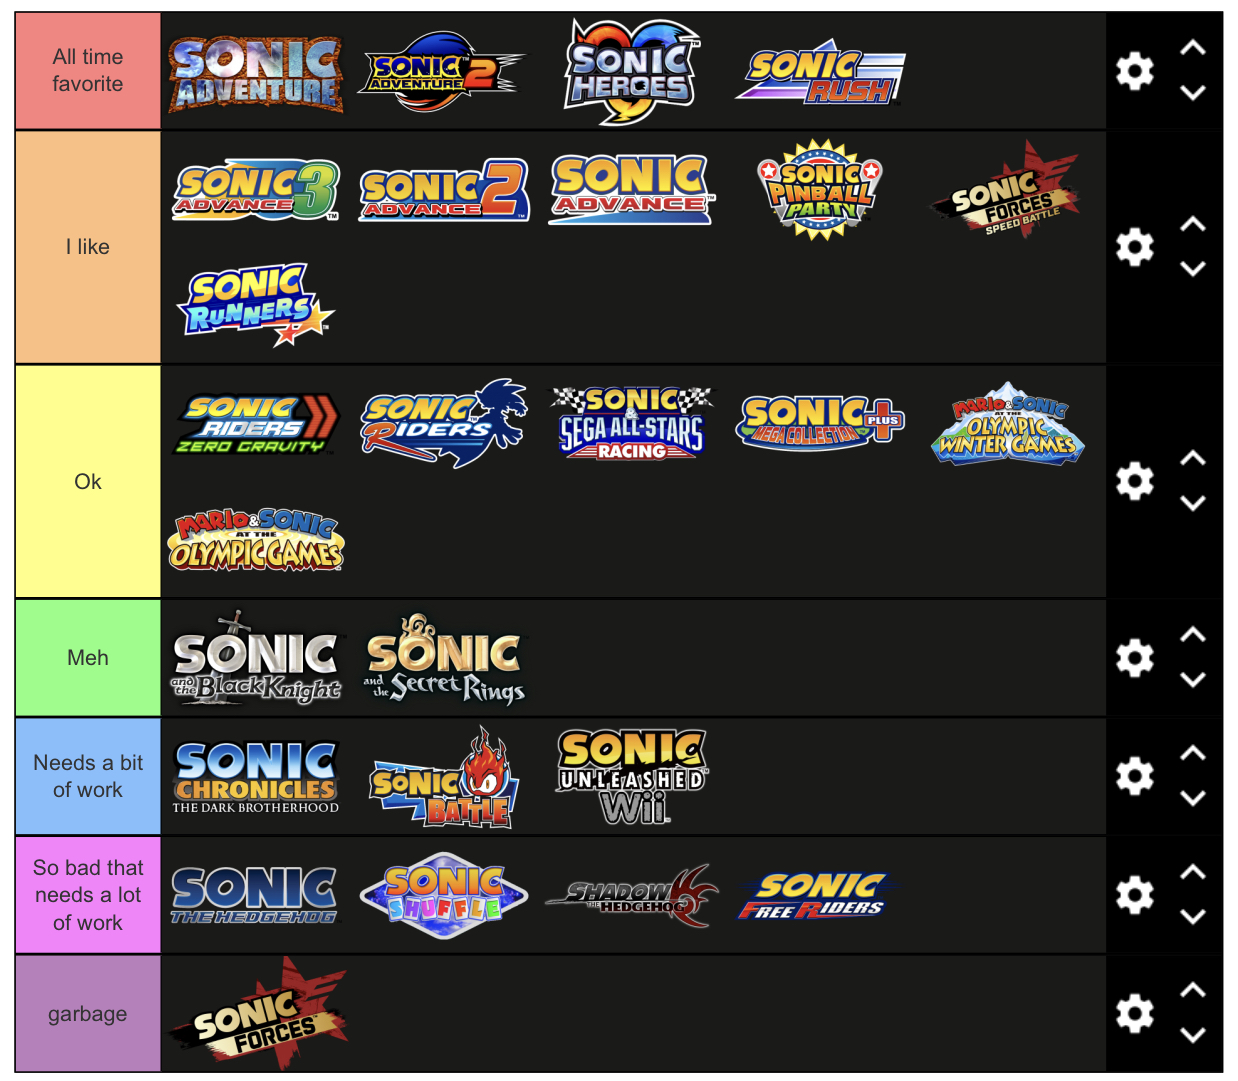 My Sonic games tier list (Please read as it took me a while to write)